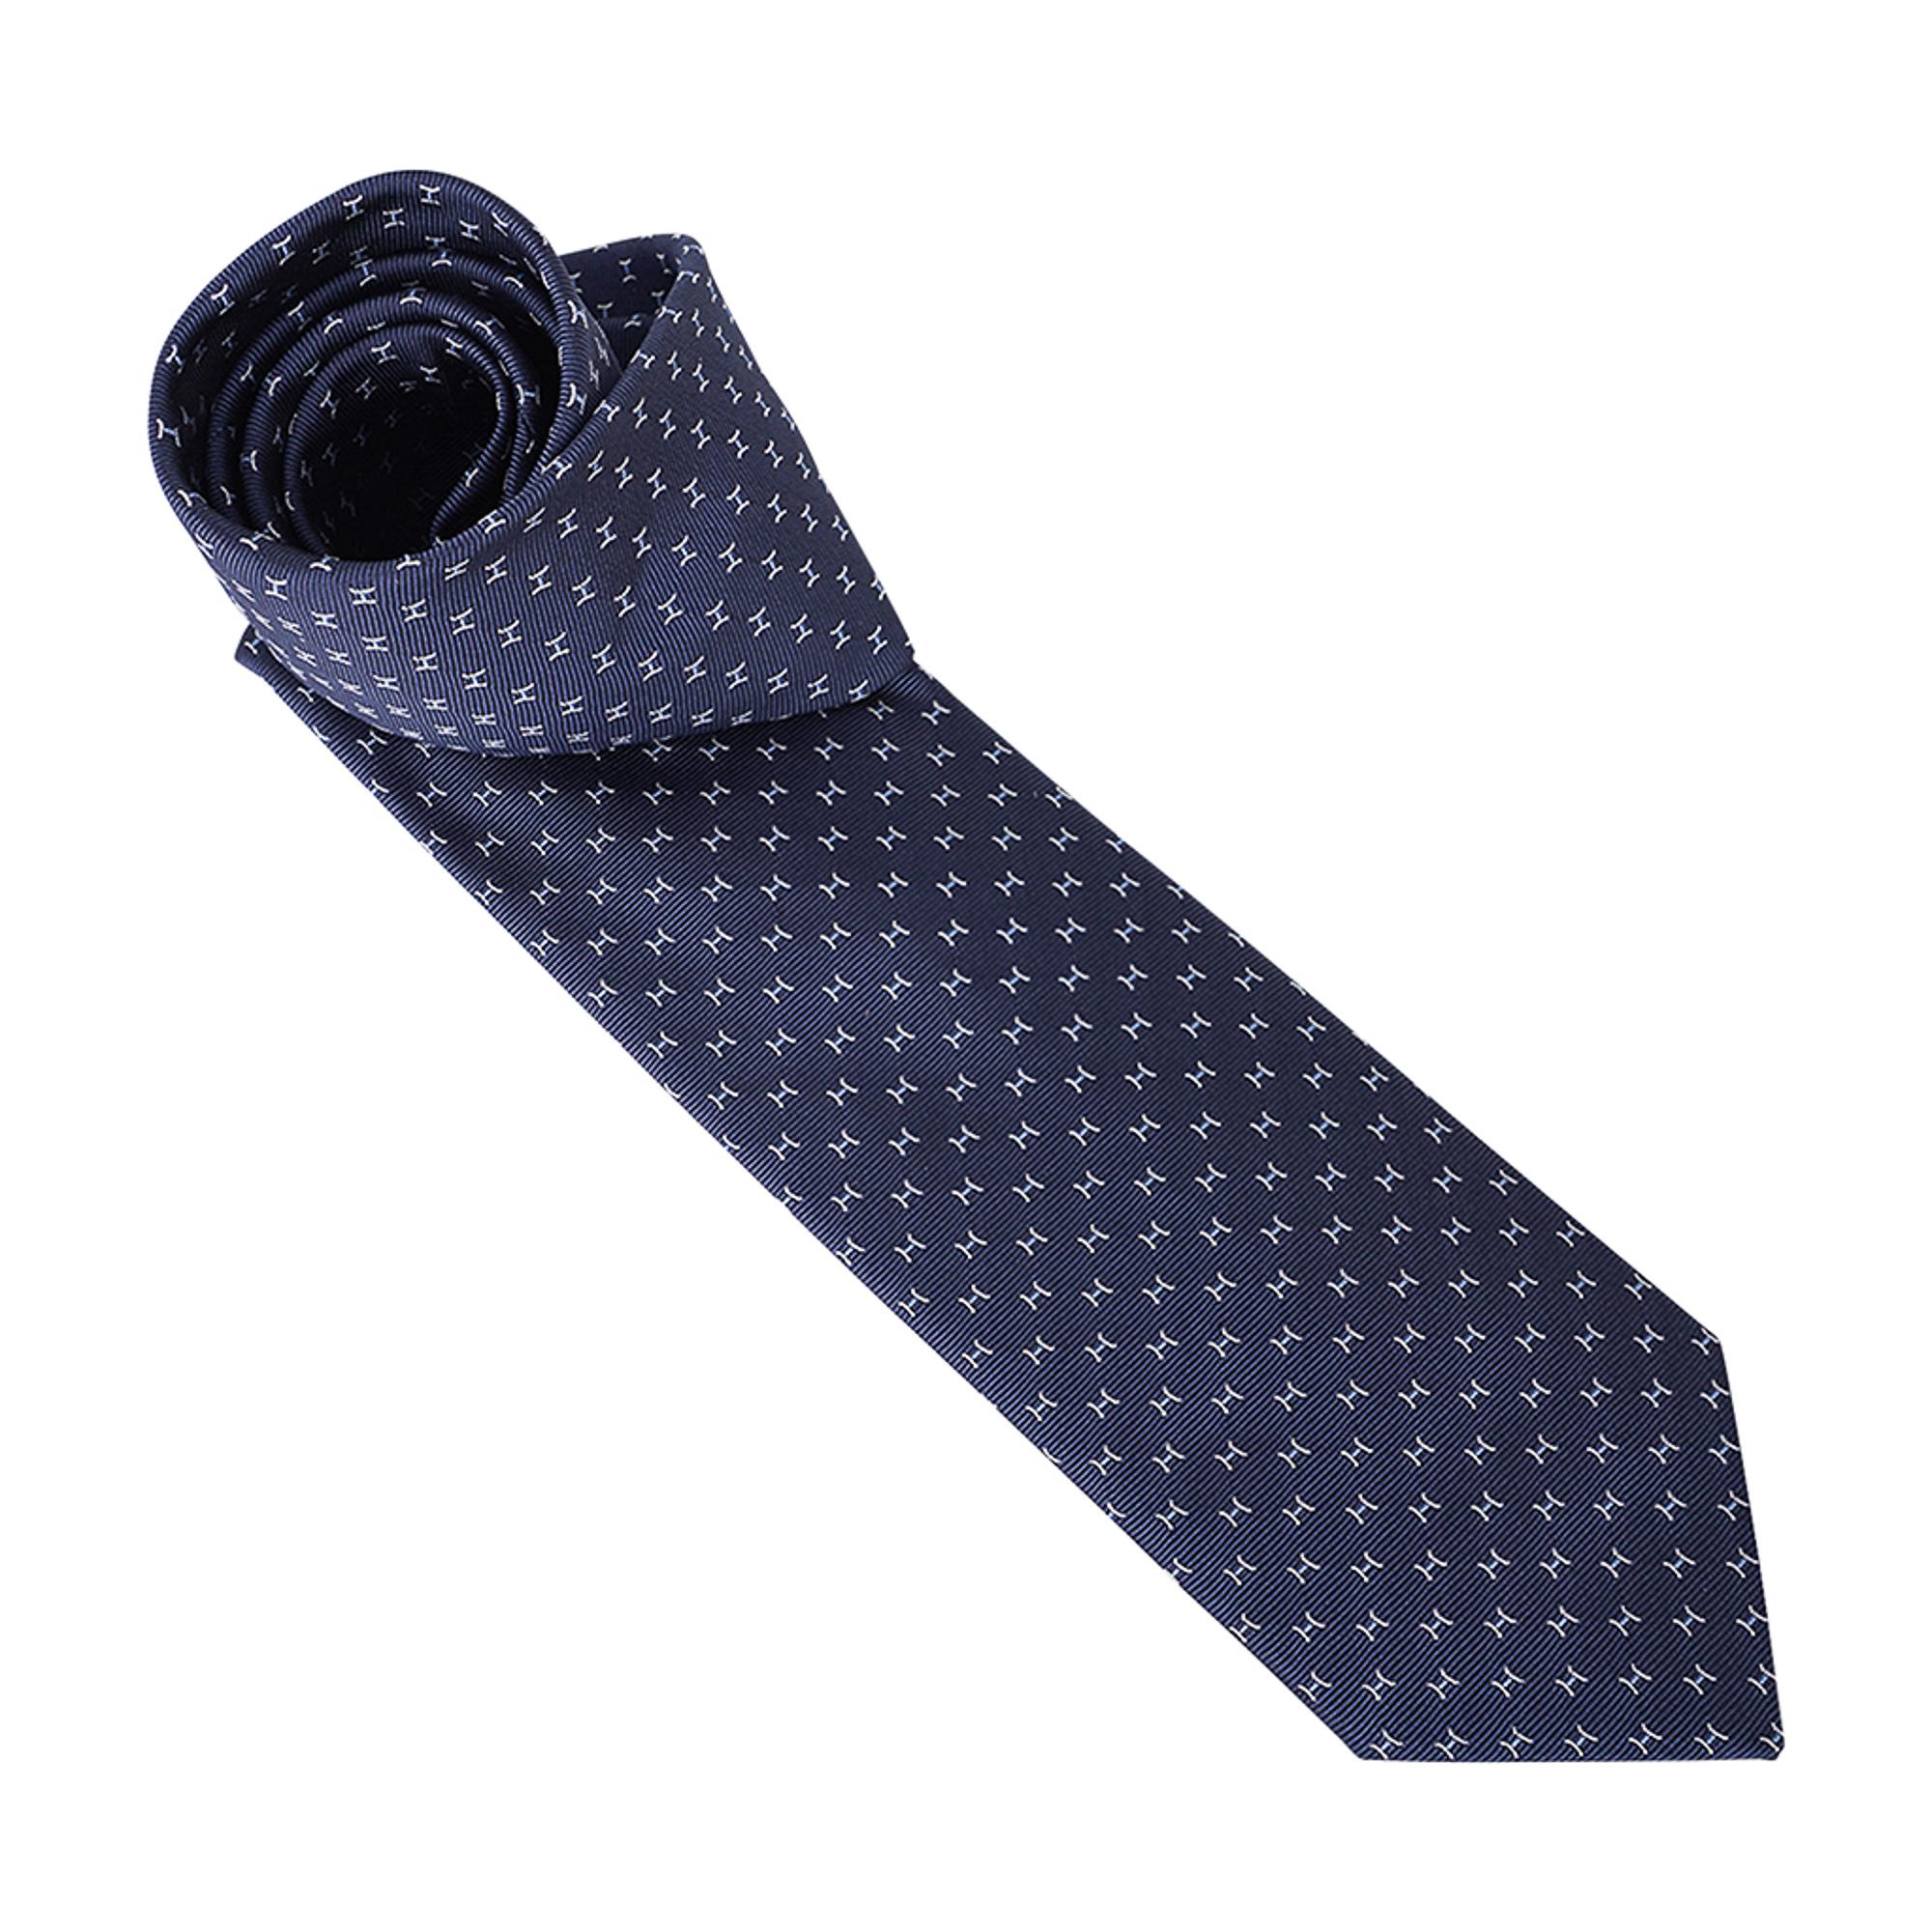 Mightychic offers an Hermes Fine H featured in Gris Bleute Ciel and Blanc.
Hand-sewn heavy silk twill.
Logo tie
Made in France
NEW or NEVER WORN.
final sale

TIE MEASURES:
WIDTH 8 cm / 3.15